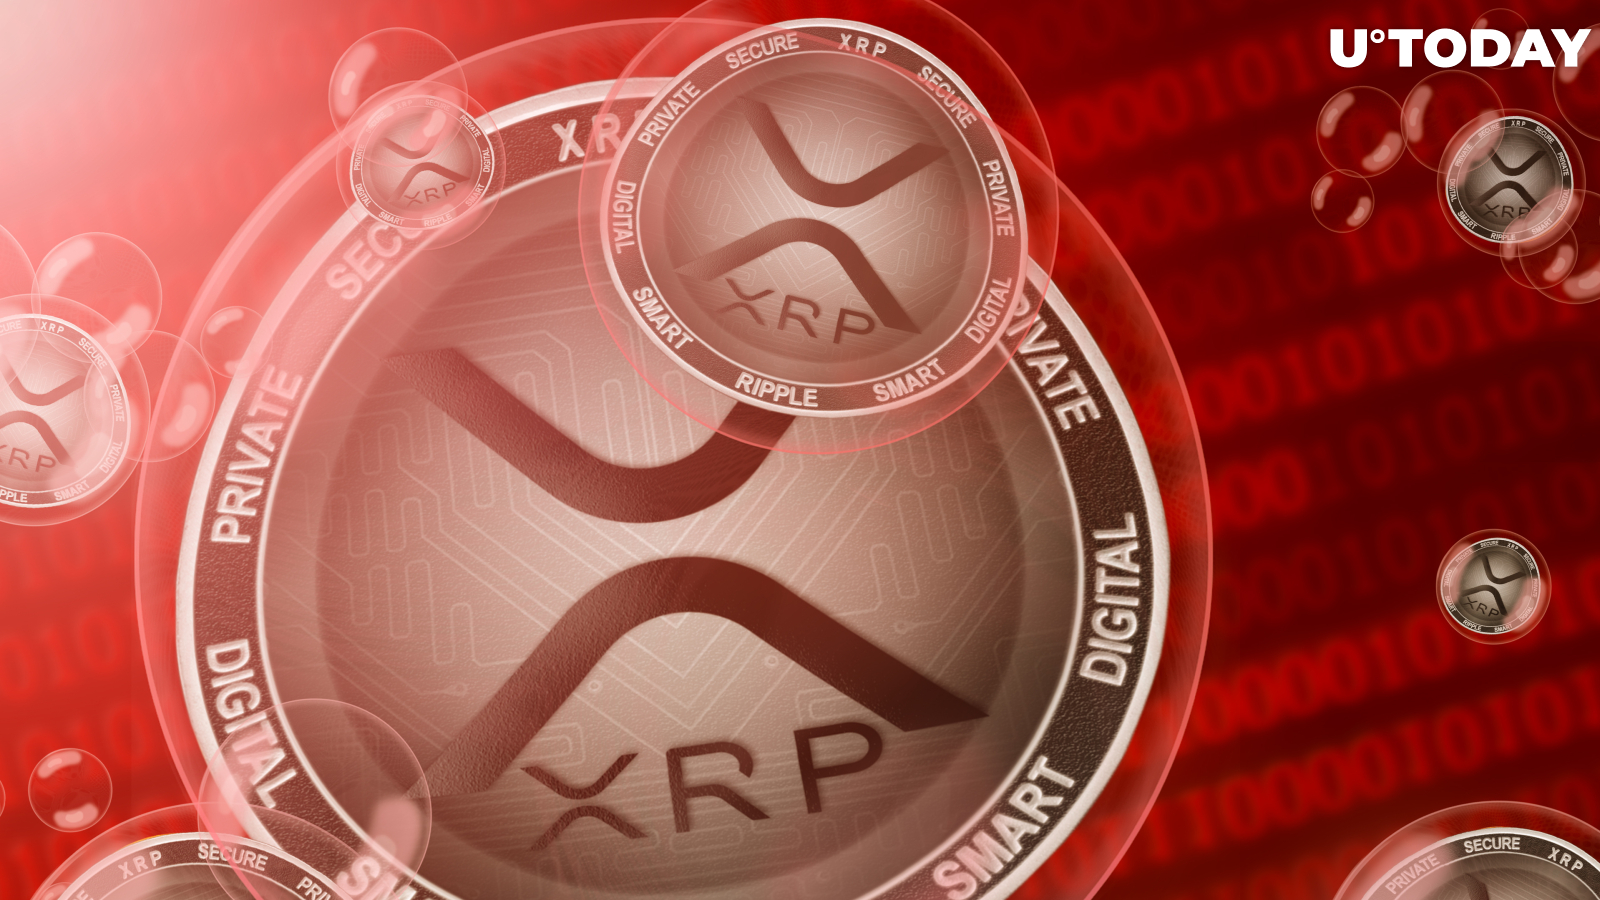 445 Million XRP Moved by Ripple and Anon Whale as XRP Price Expected to Spike in April 2022